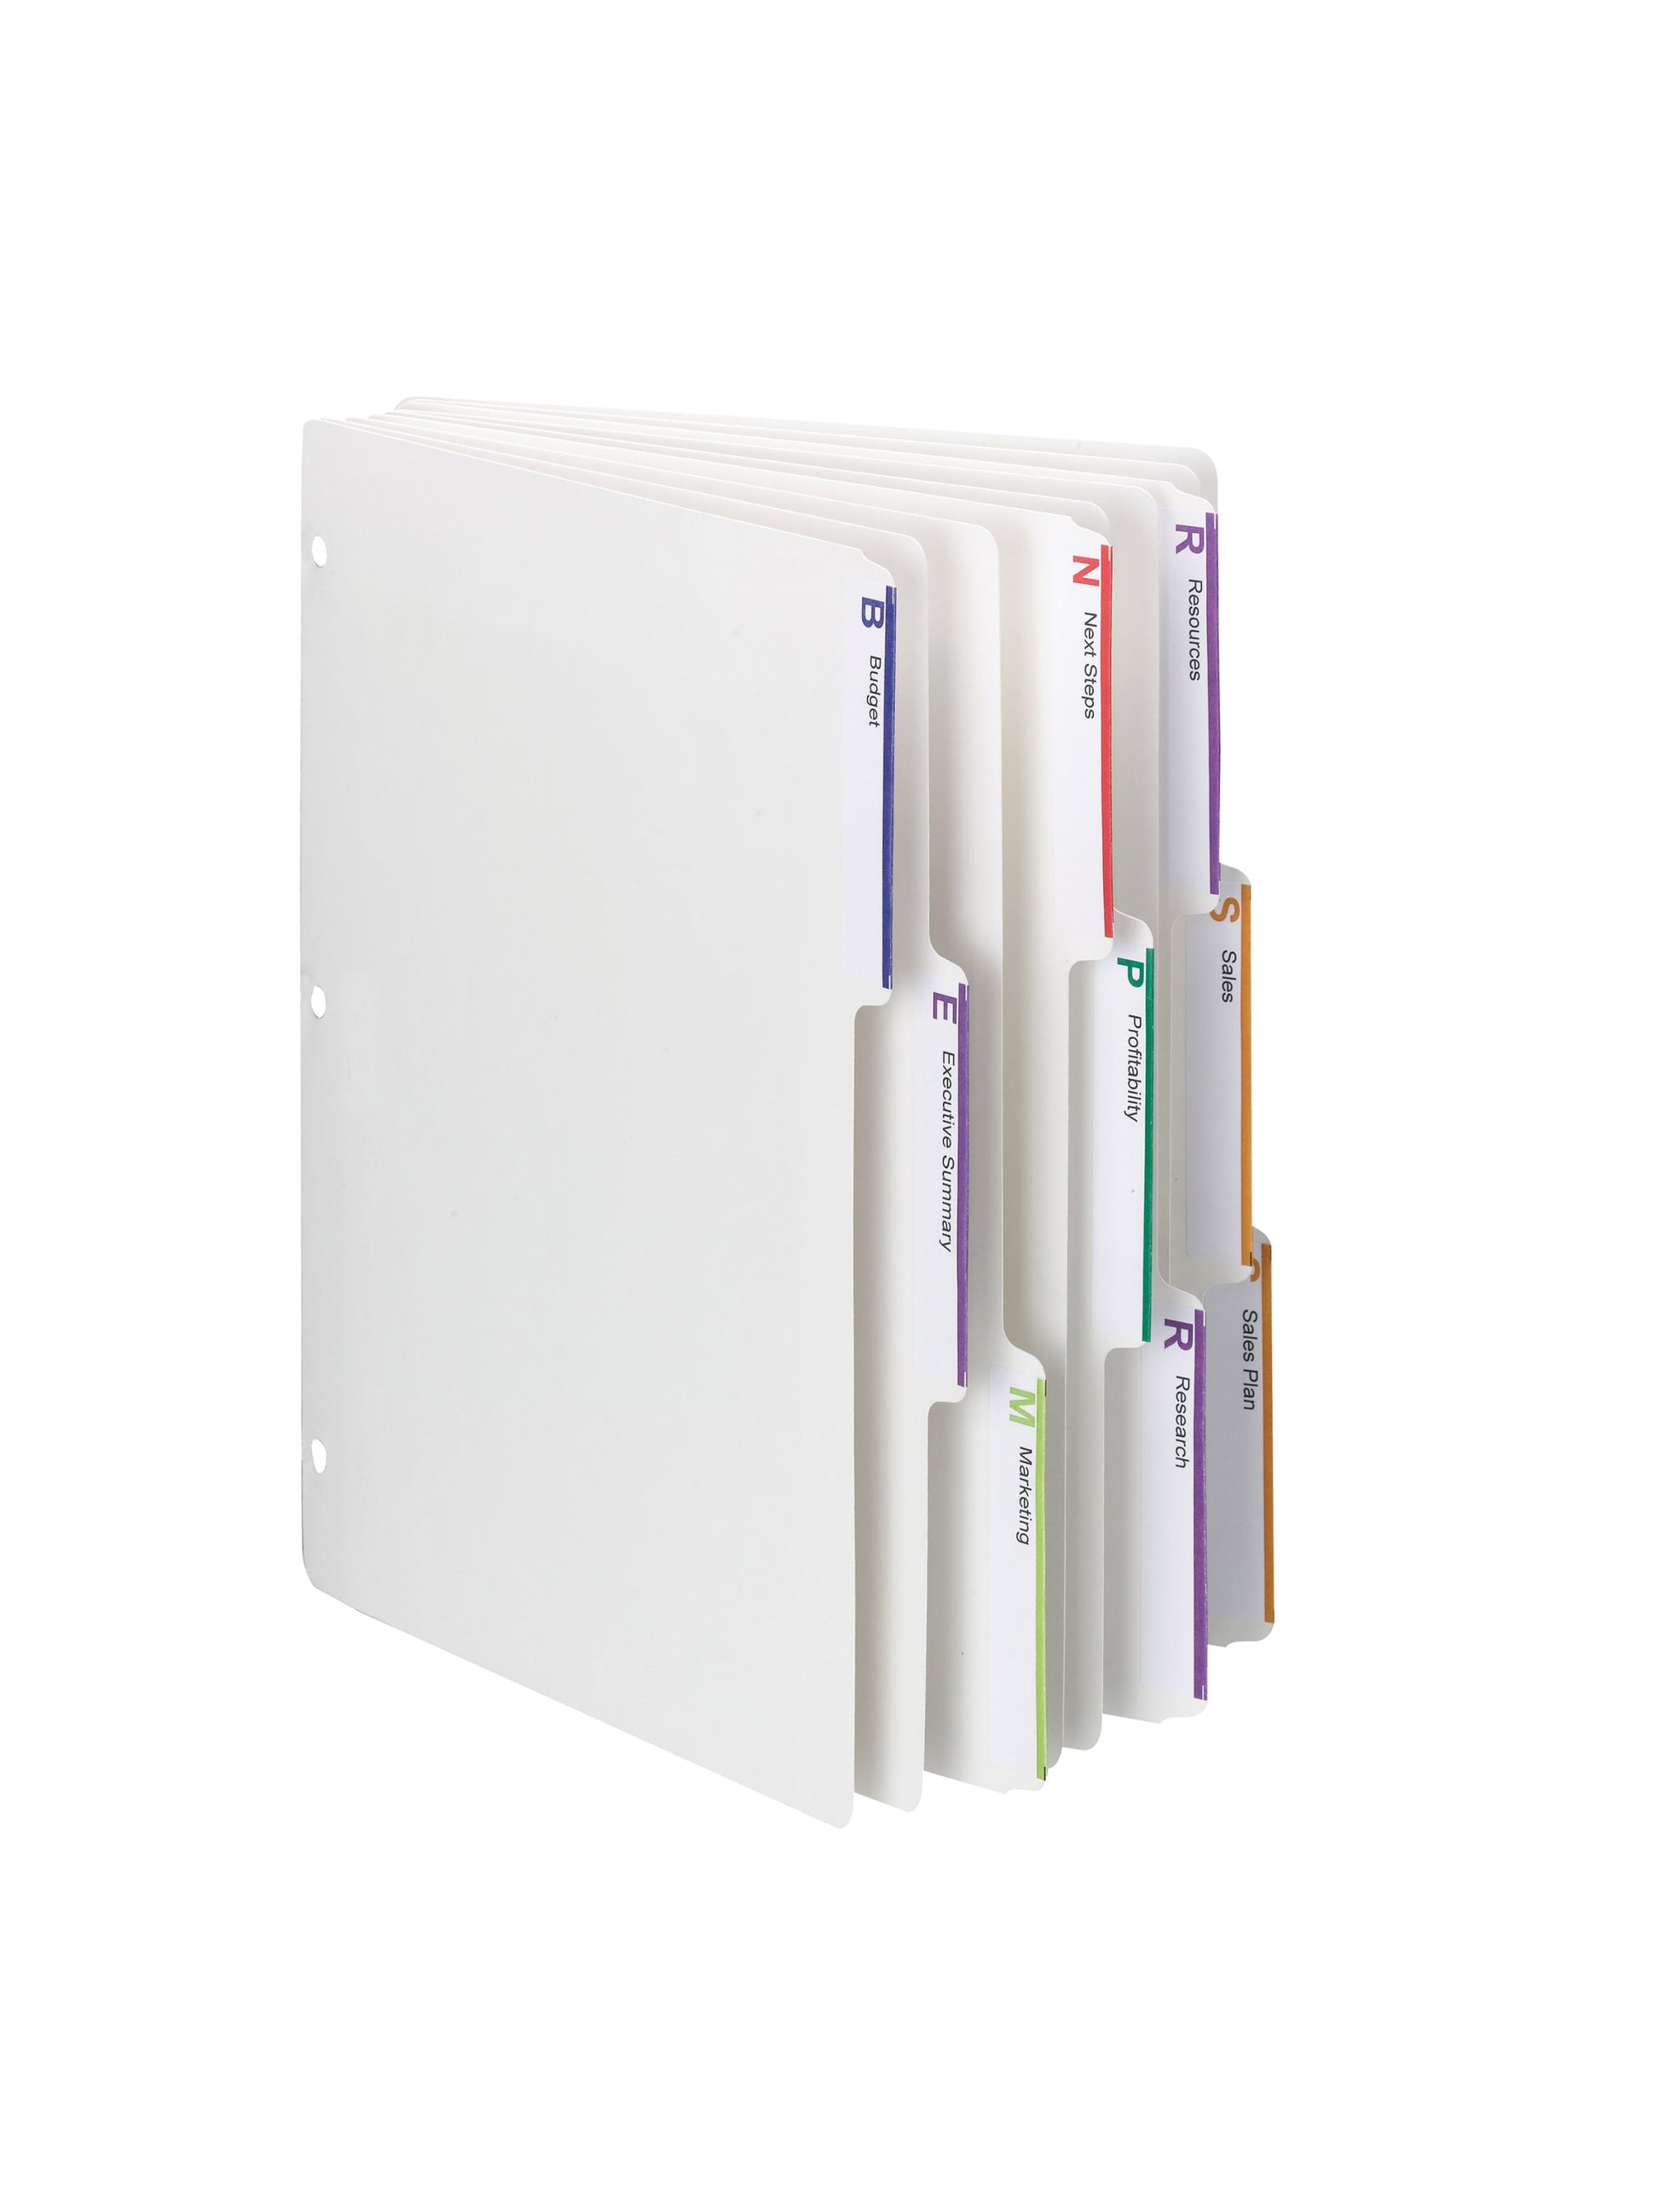 Viewables® Three-Ring Binder Dividers, White Color, Letter Size, Set of 0, 30086486894136